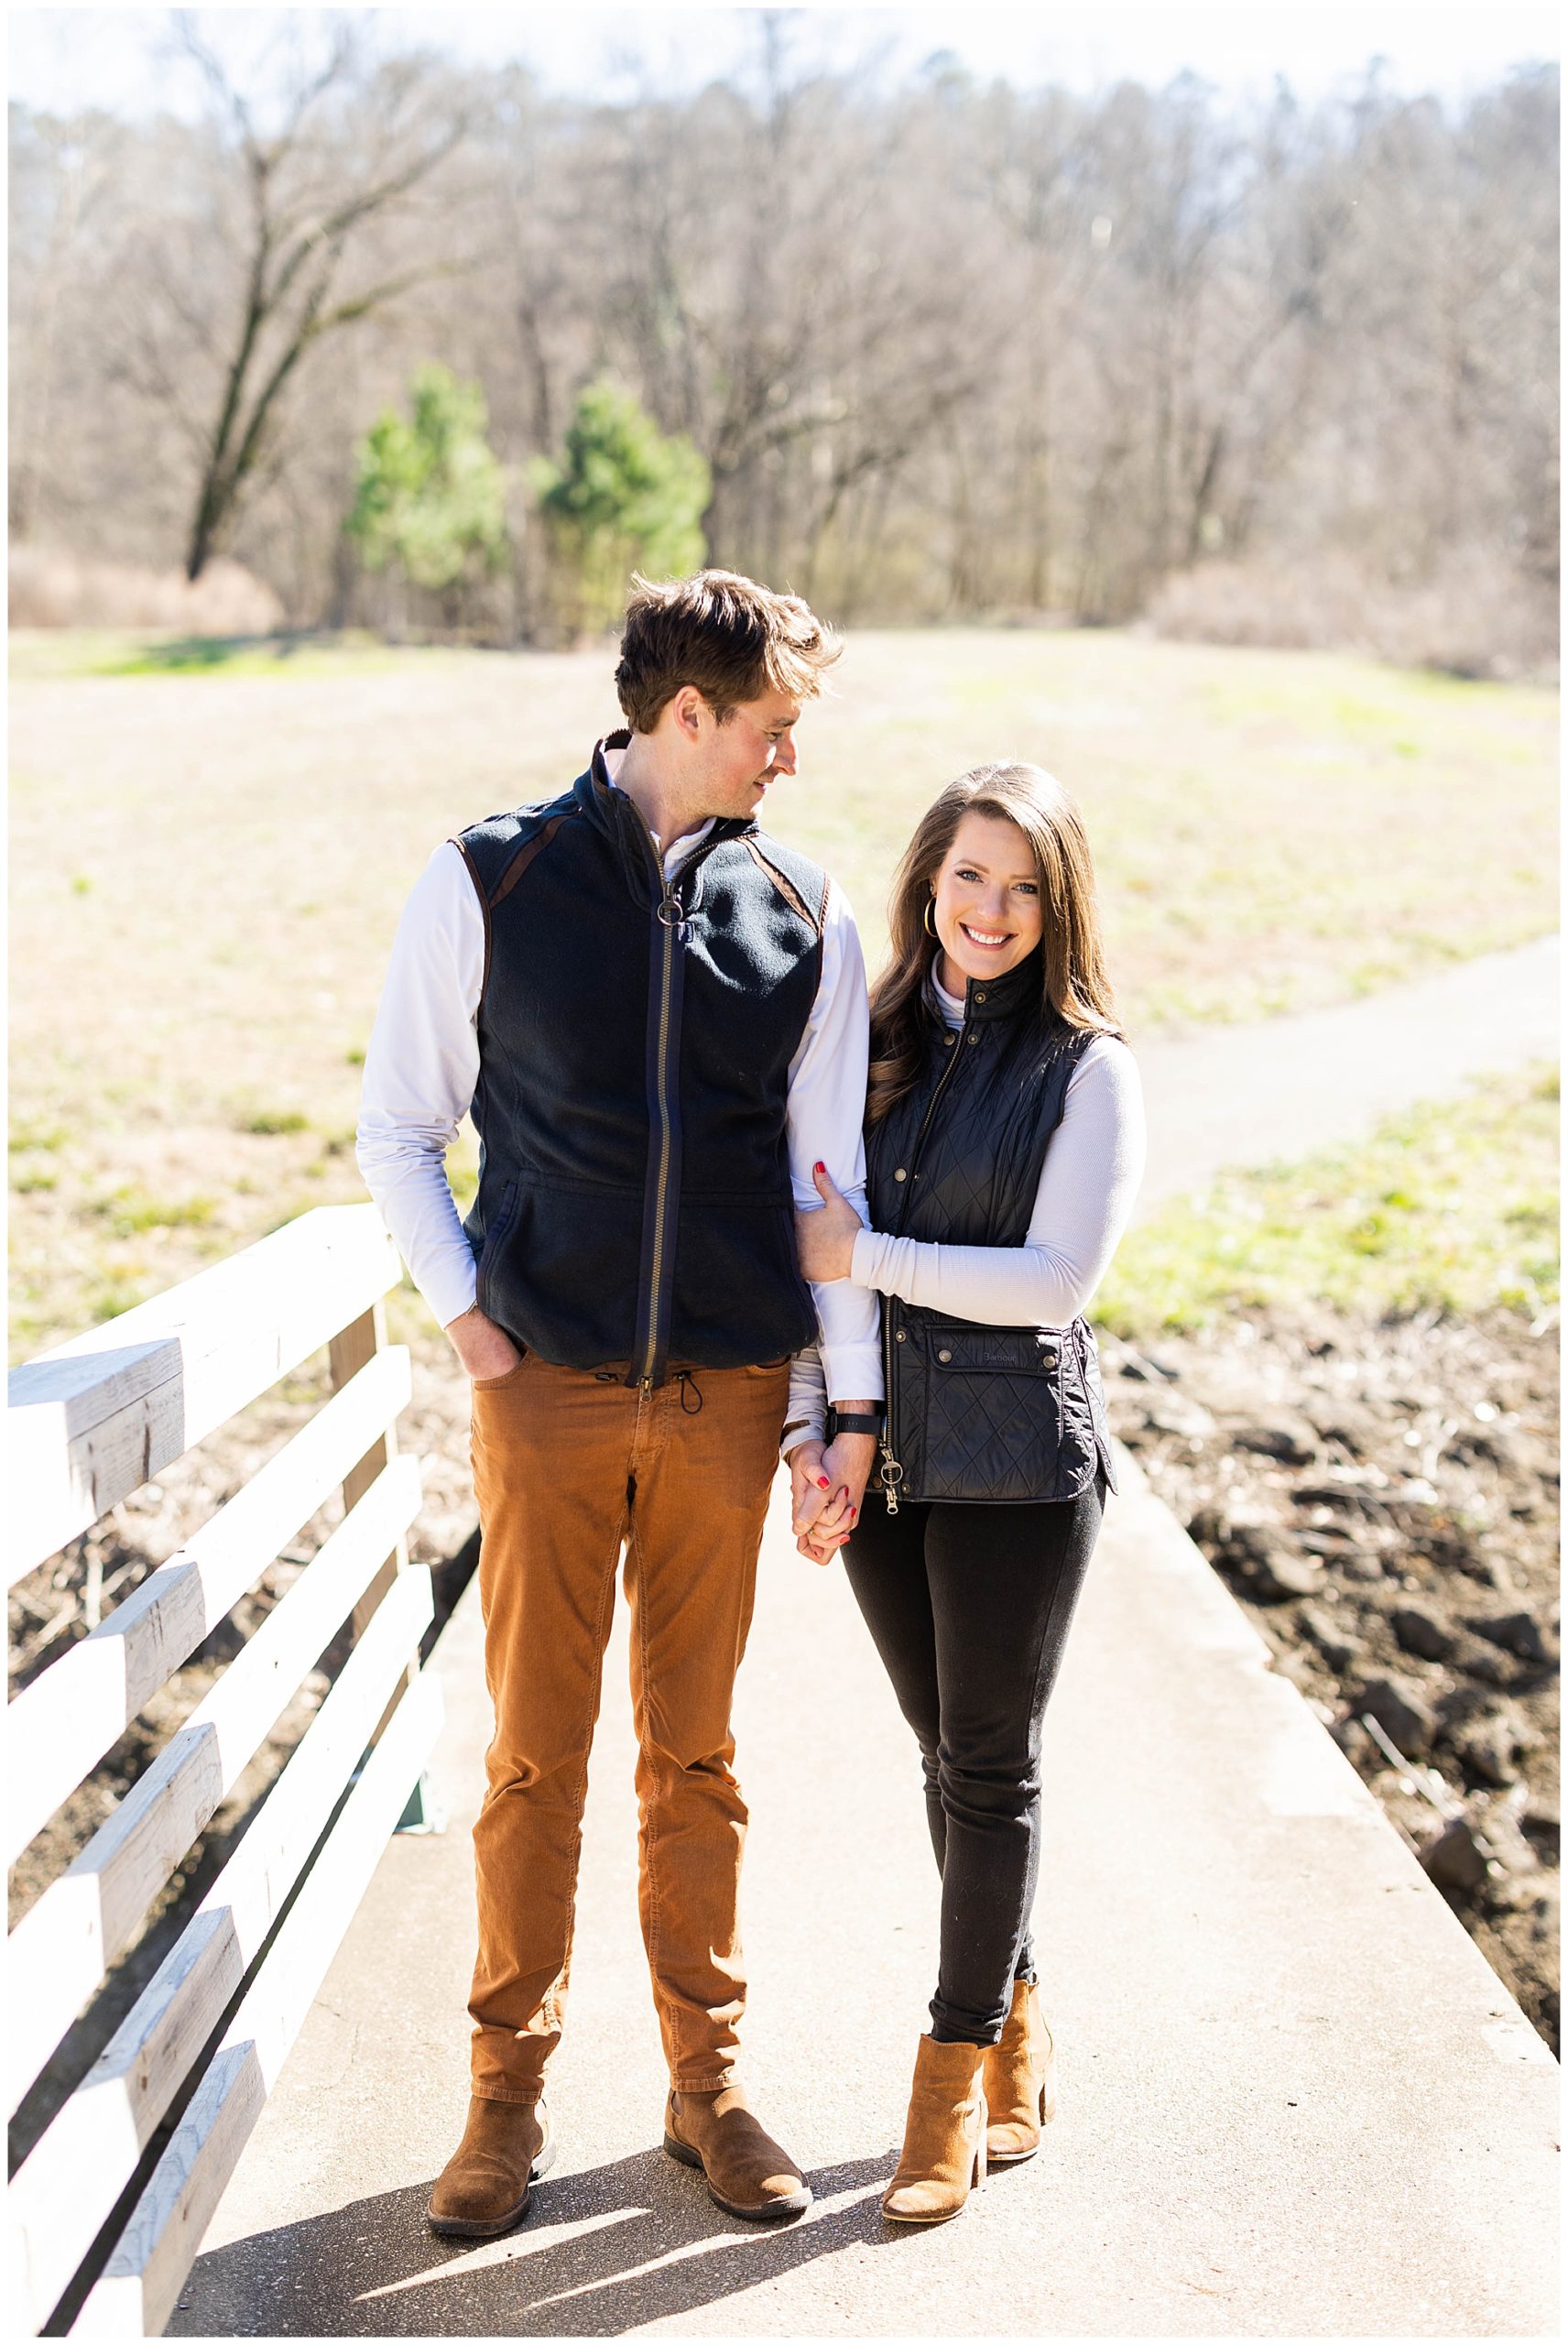 Eleanor Stenner Photography - a Birmingham, AL wedding photographer - photographs the Visitainers in her Valentine's Day Mini Sessions